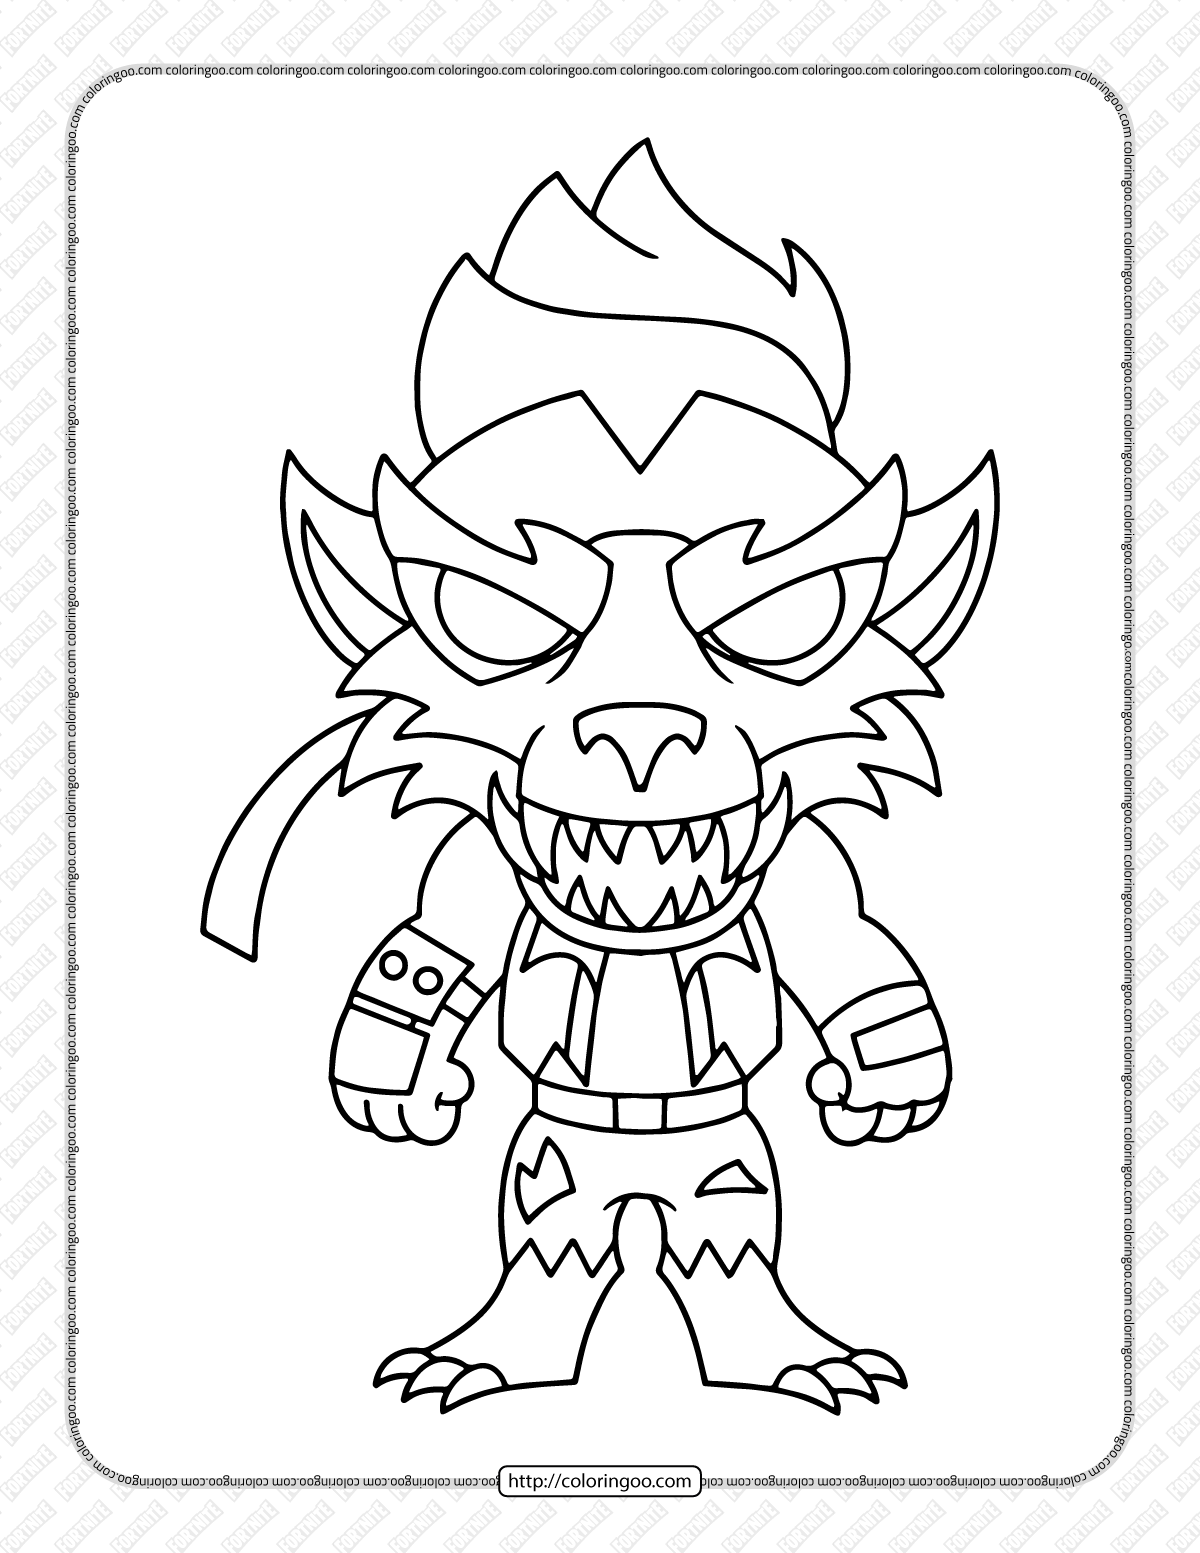 chibi fortnite coloring pages 24